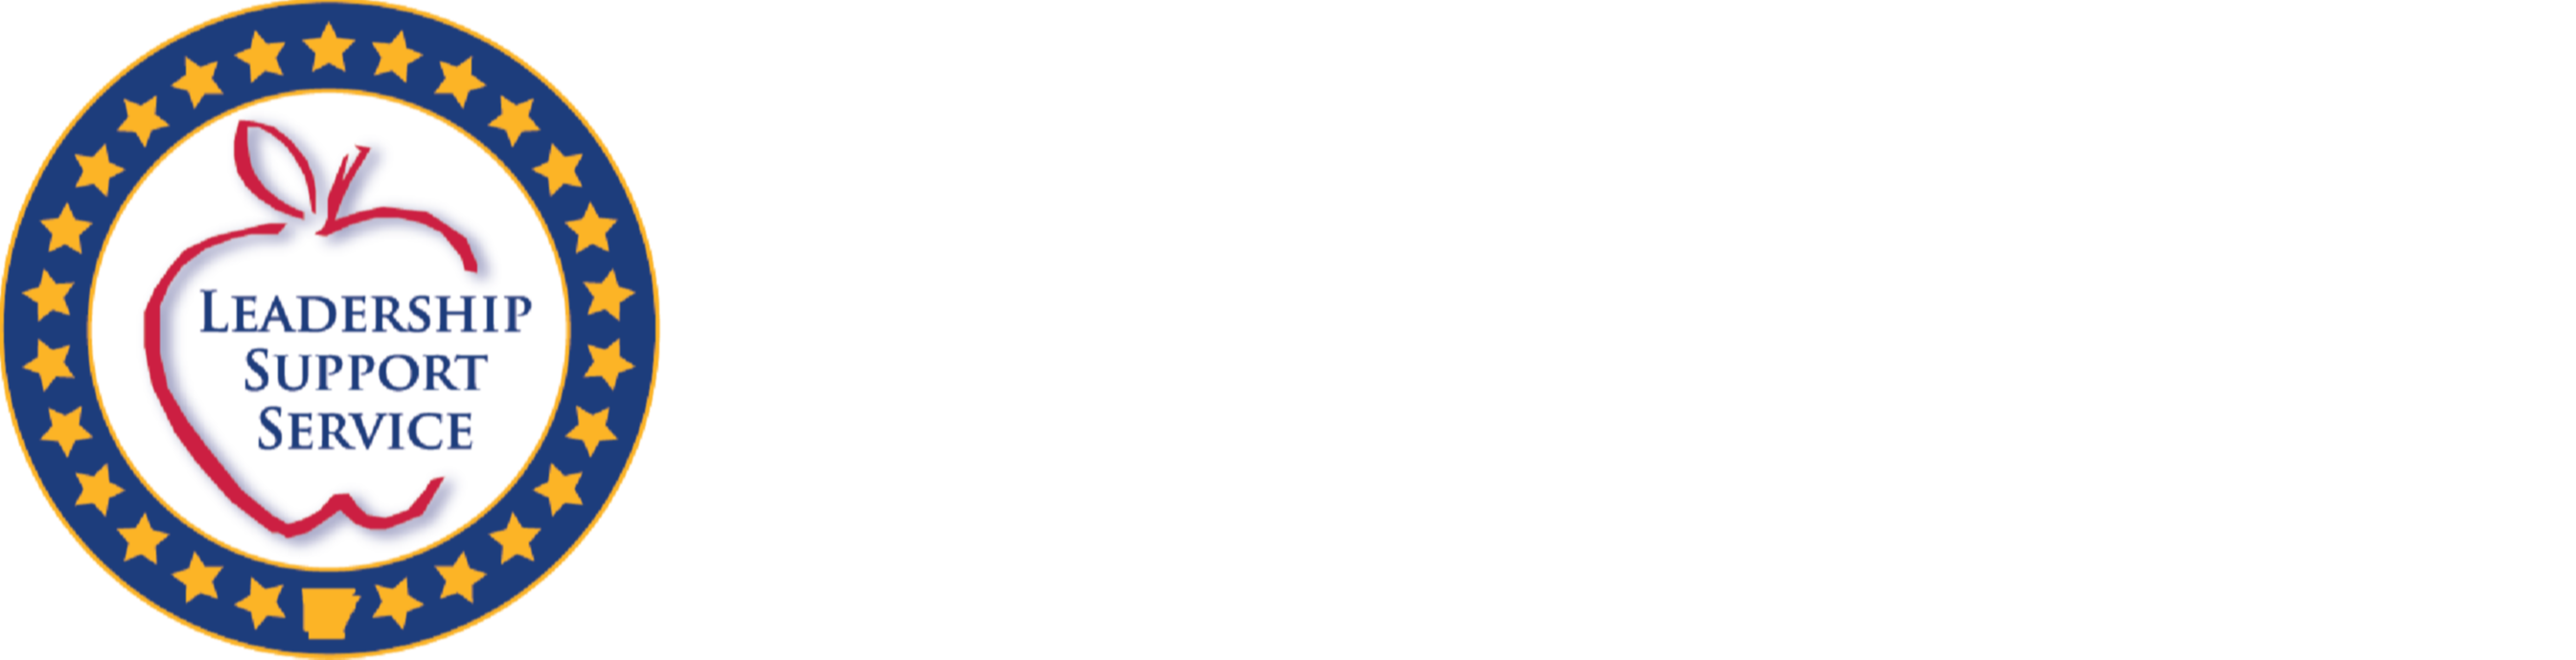 Division of Elementary and Secondary Education Logo